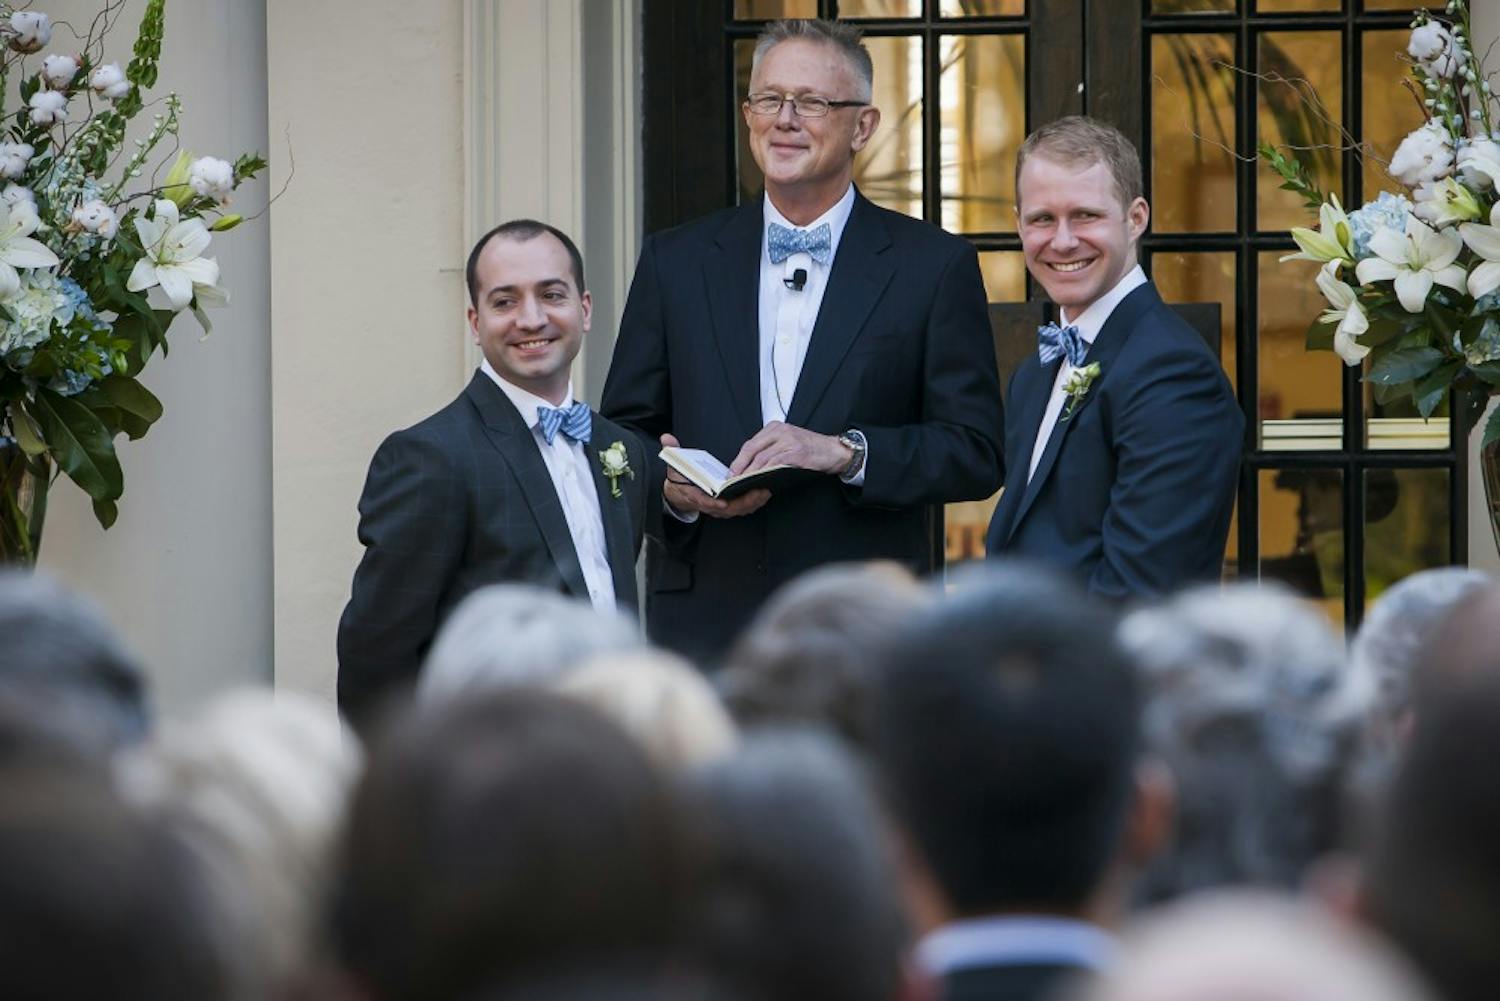 FROM LEFT: Zach Howell, officiant Dr. Jesse L. White Jr, and Garrett Hall (ALL CQ) during the first same-sex wedding ceremony ever at The Carolina Inn in Chapel Hill, NC.  on April 6, 2013.